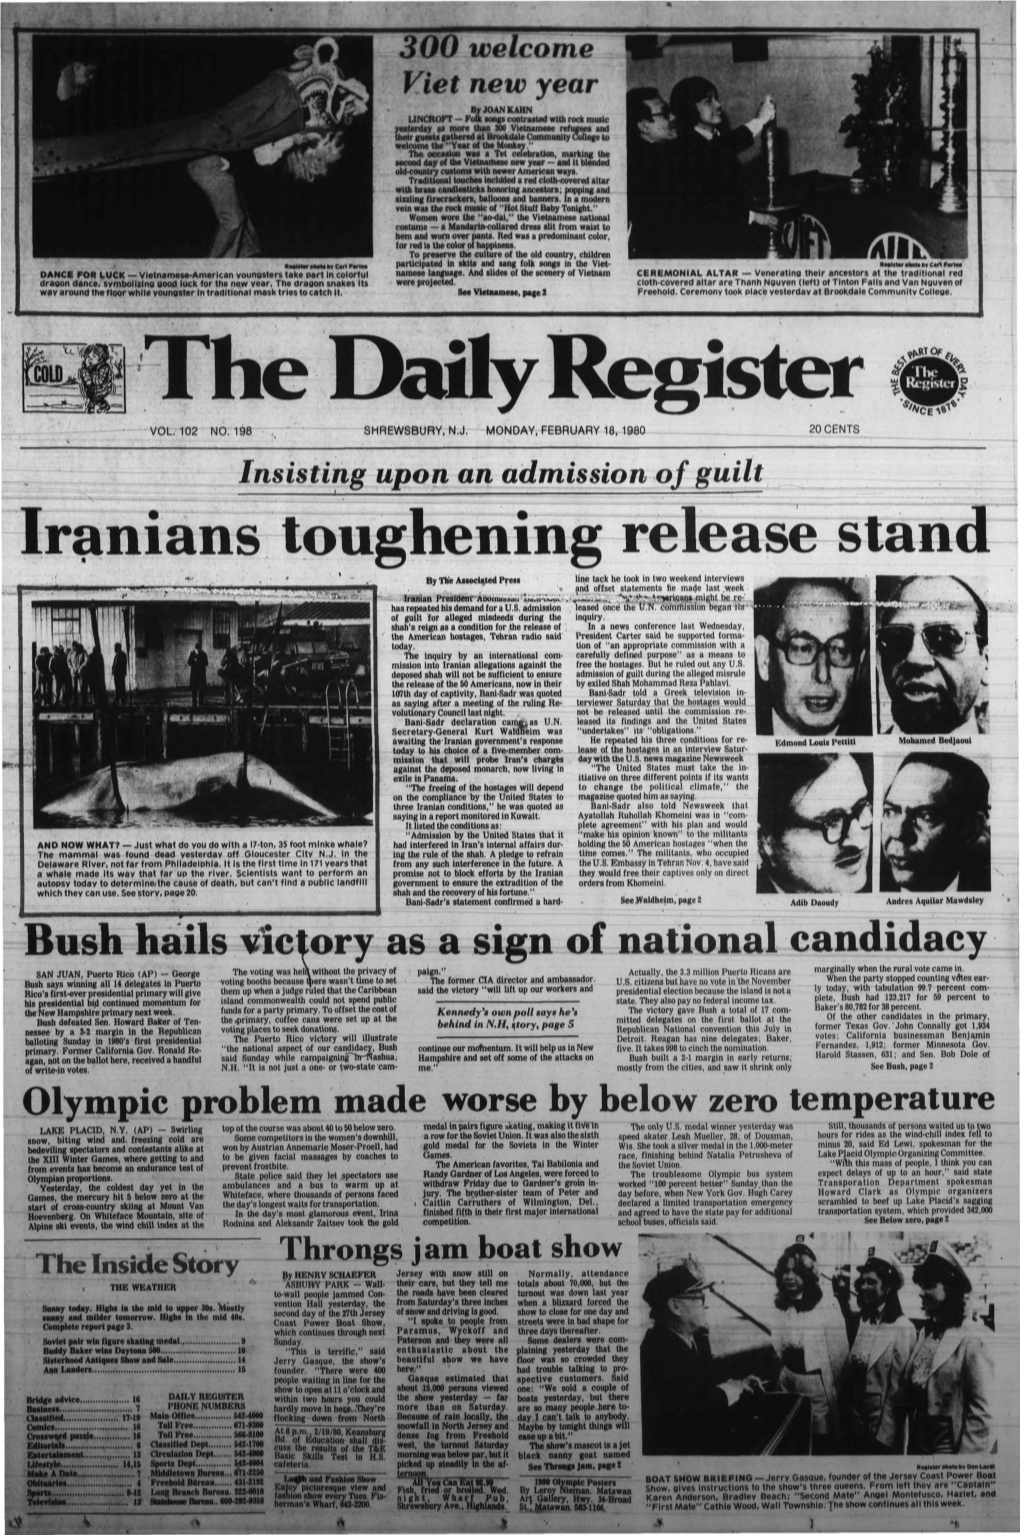 Iranians Toughening Release Stand